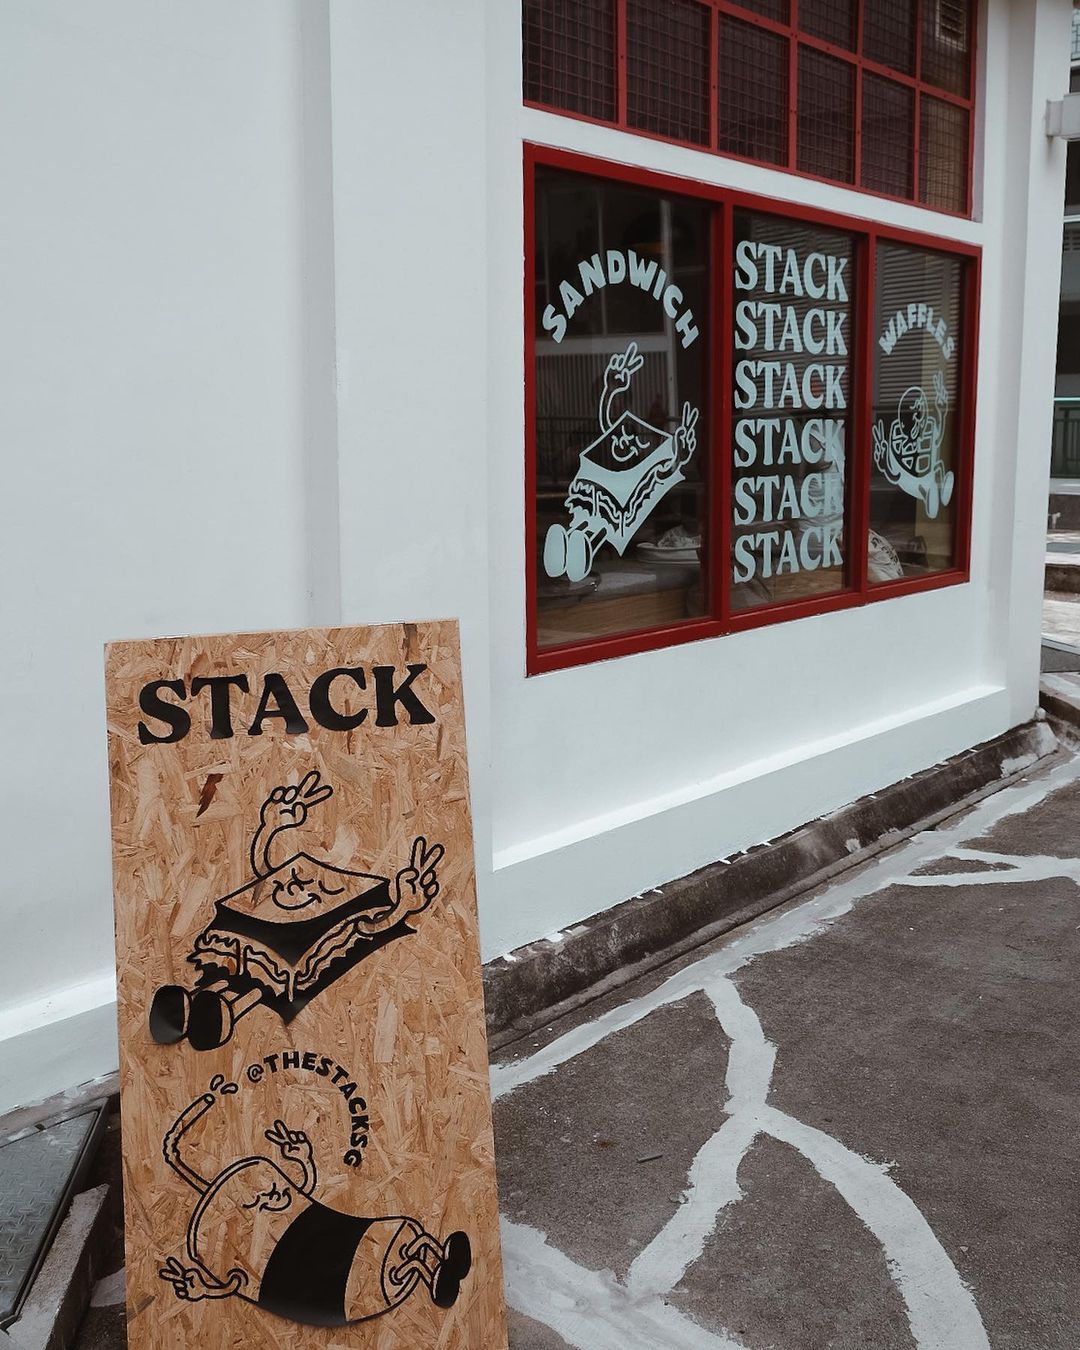 New cafes & restaurants in August 2022 - stack